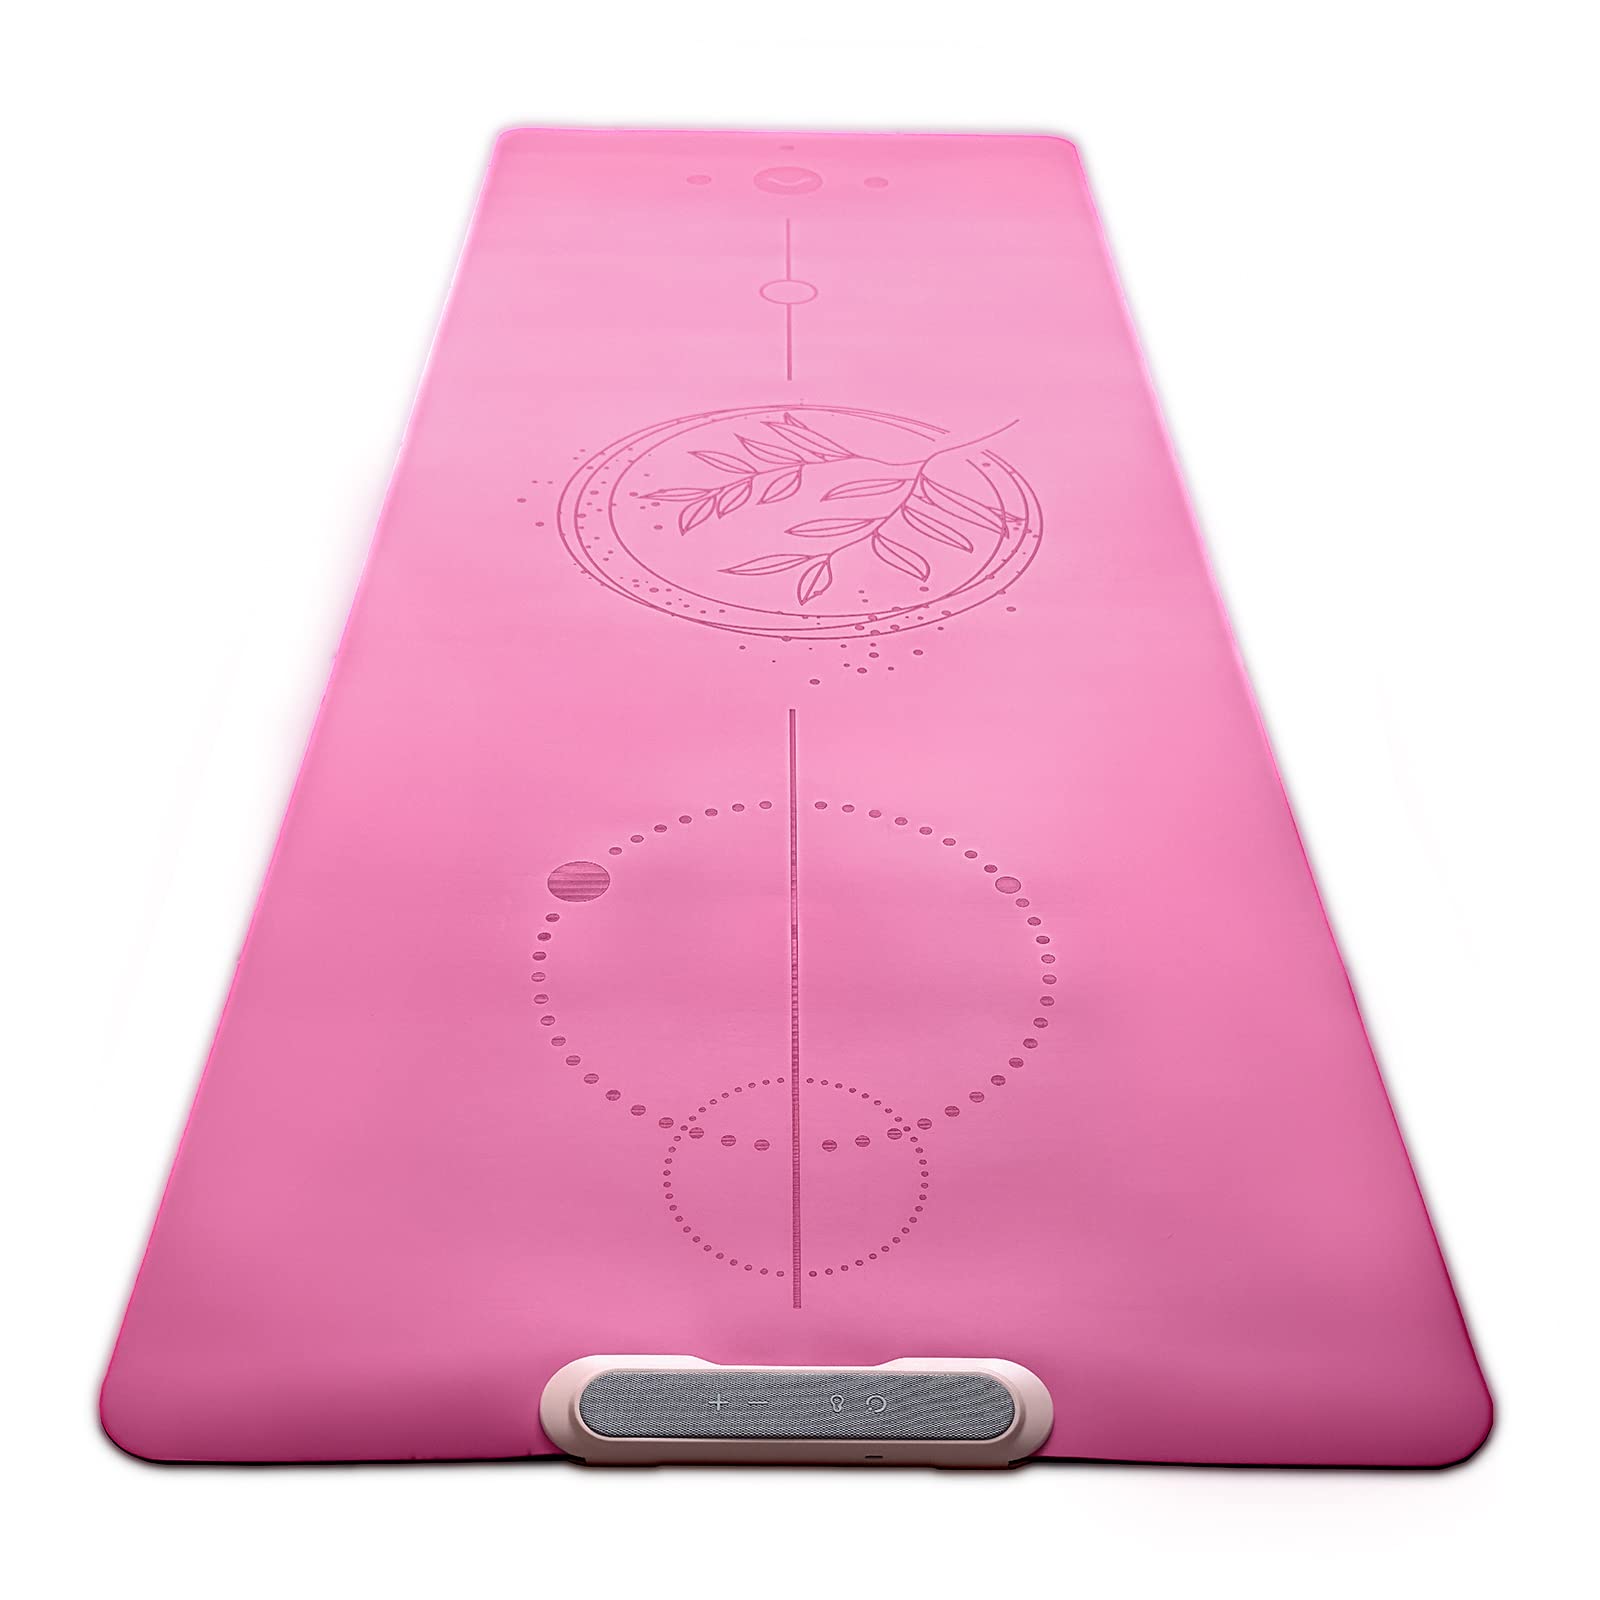 COOLU Innovative Yoga Mat For Home Workout And Outdoor Exercises - Non-Slip Thick Yoga Mat for Fitness Pilates Stretching -